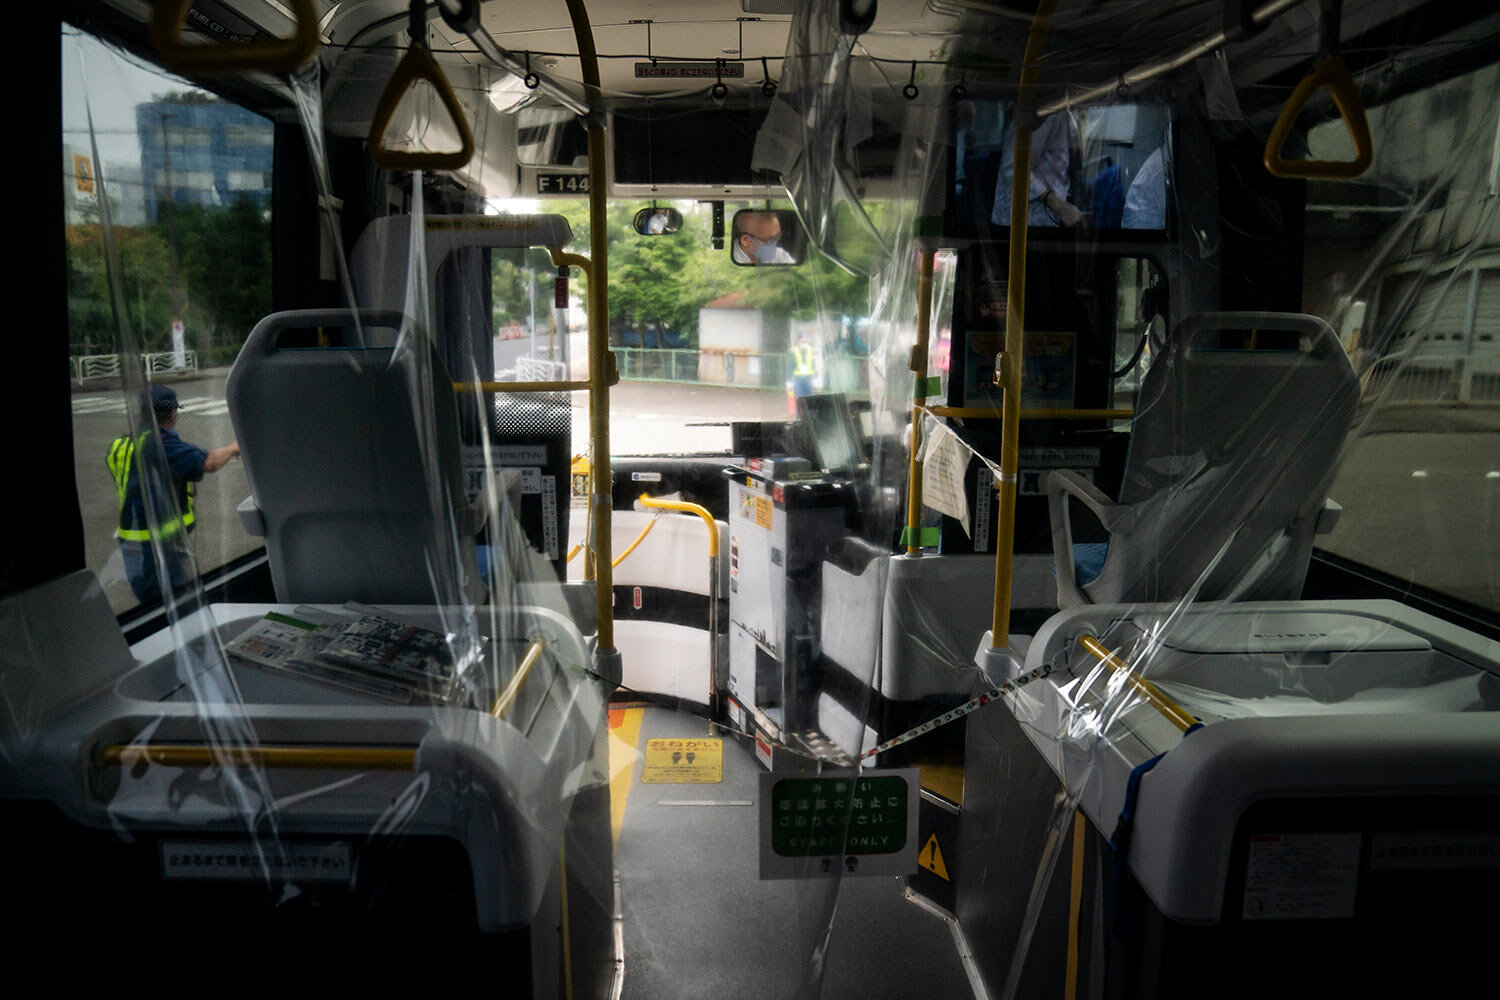  A protective plastic cover is installed in a shuttle bus to help curb the spread of COVID-19 prior to the 2020 Summer Olympics Sunday, July 11, 2021, in Tokyo. (AP Photo/Jae C. Hong) 